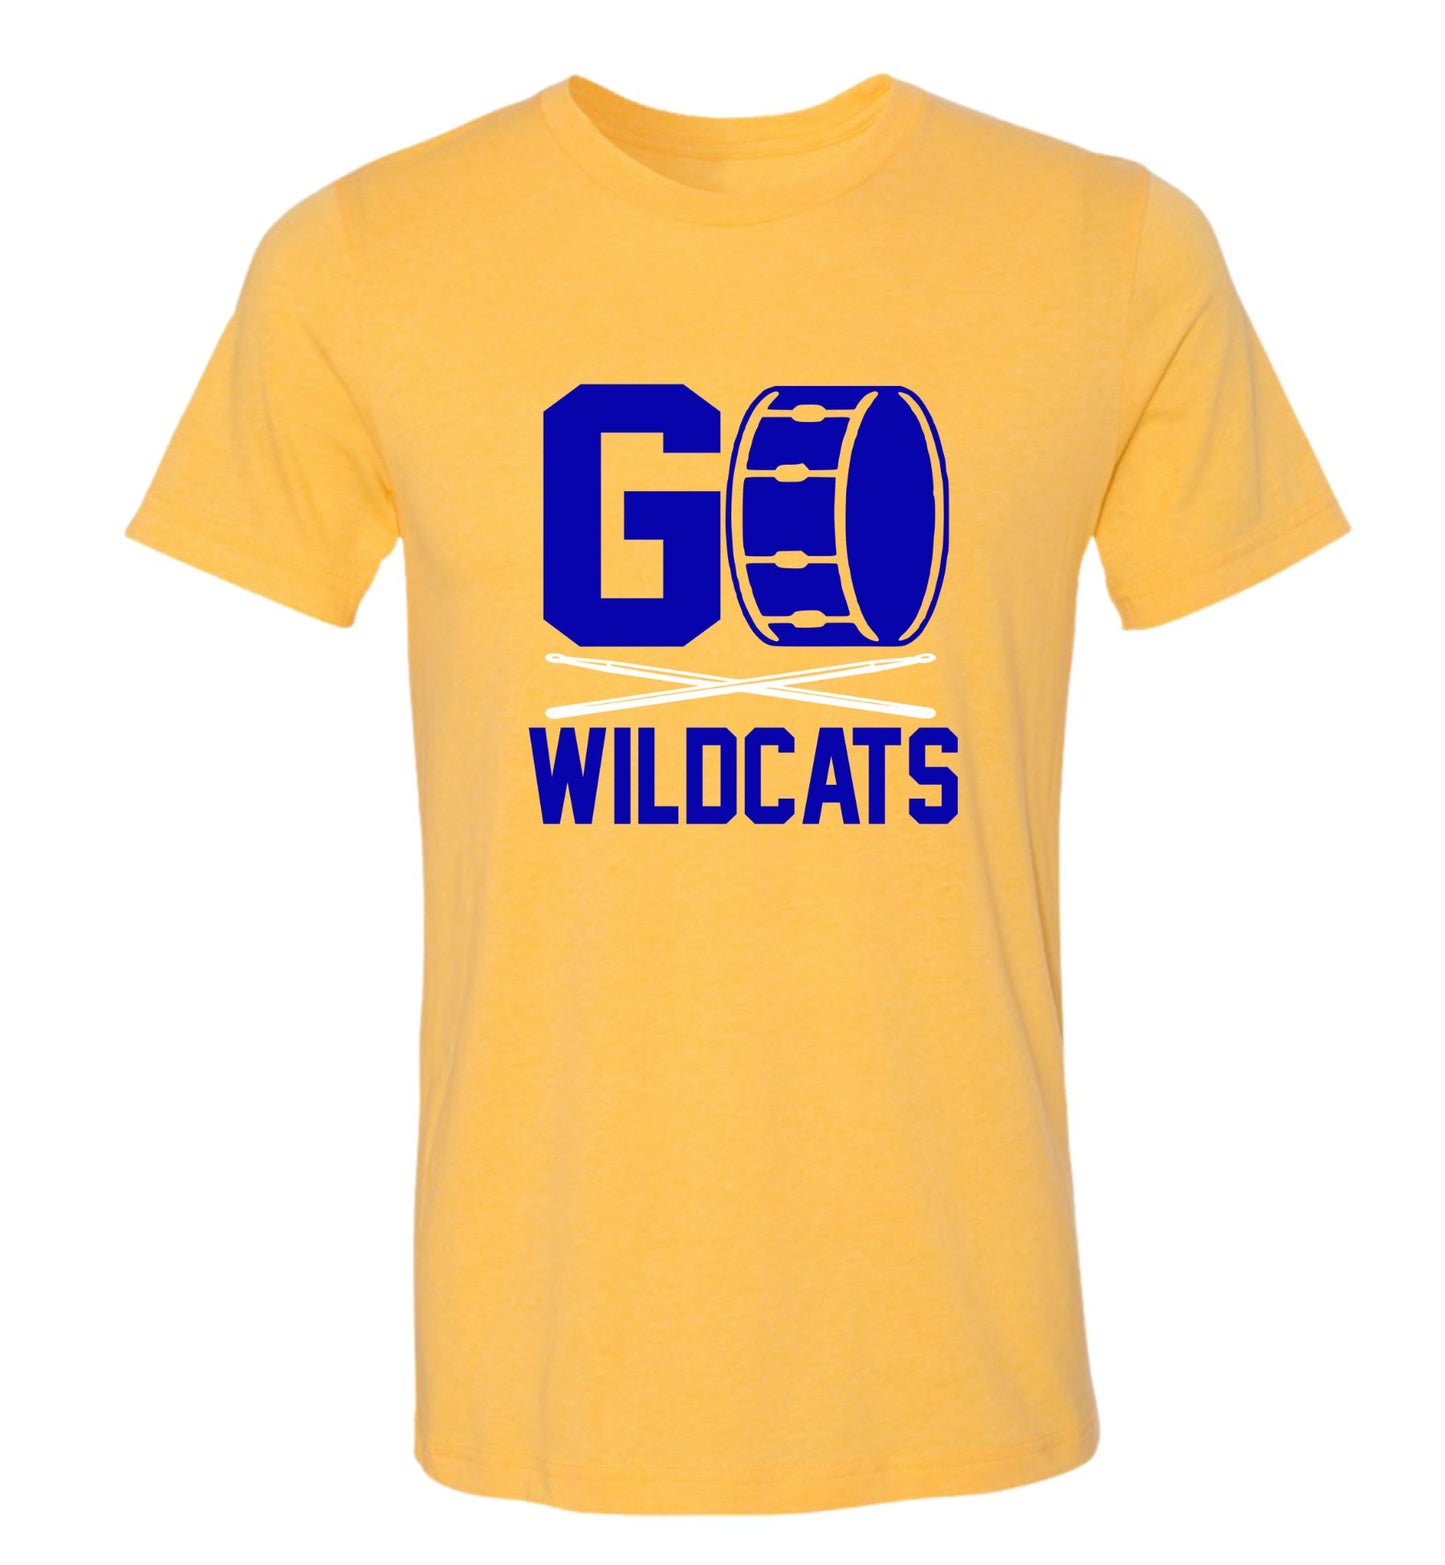 Wildcats band - Crew and V-Neck Tee